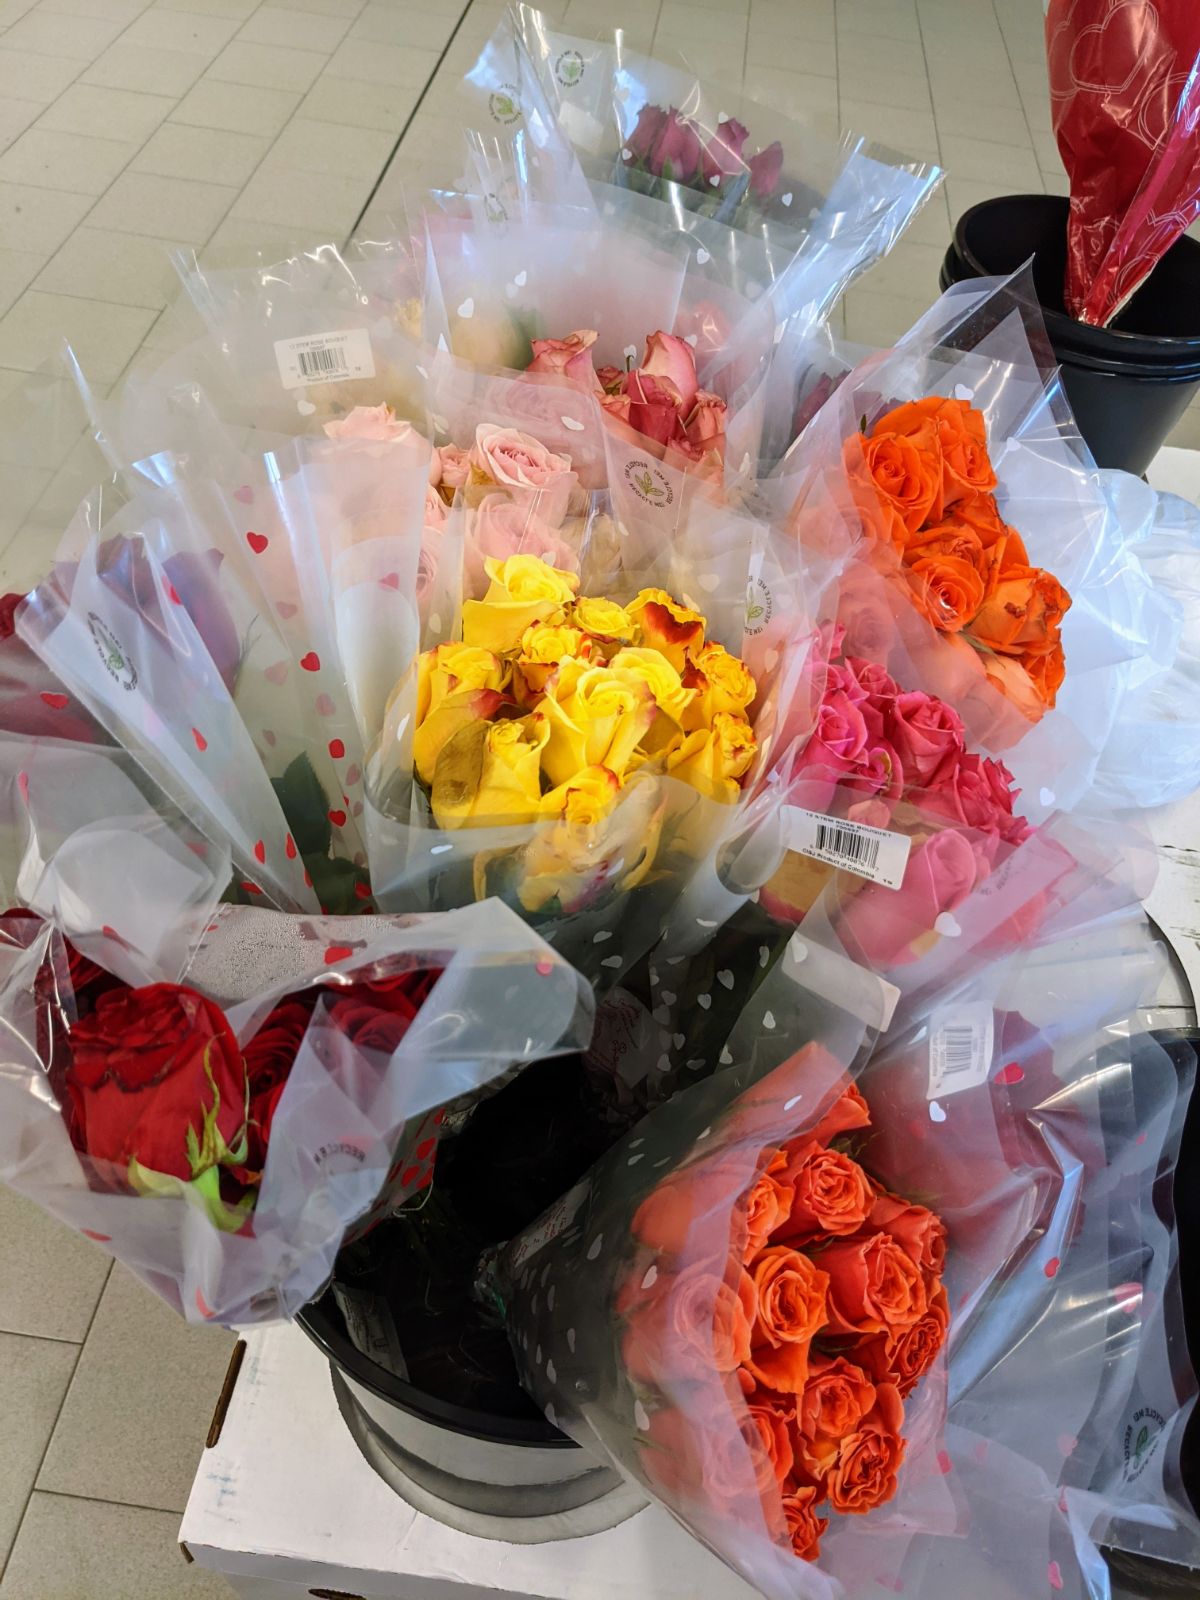 Colorful bouquets of roses at Aldi for Valentine's Day - yellow, pink, orange, red, coral